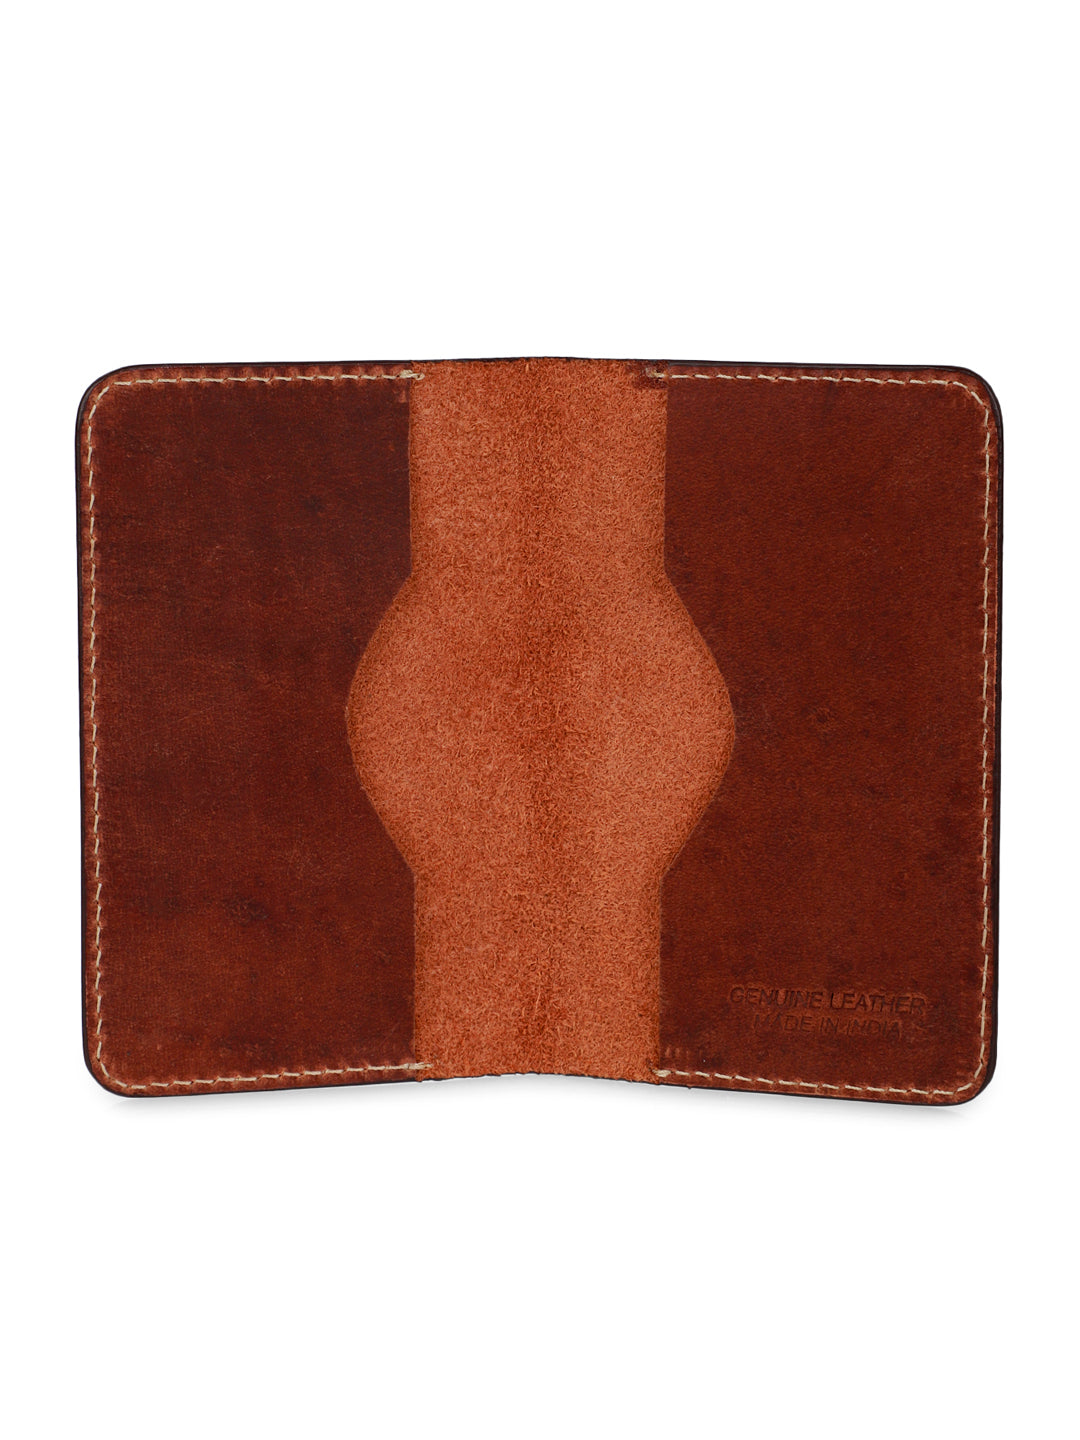 Genuine leather two-tone brown cardholder